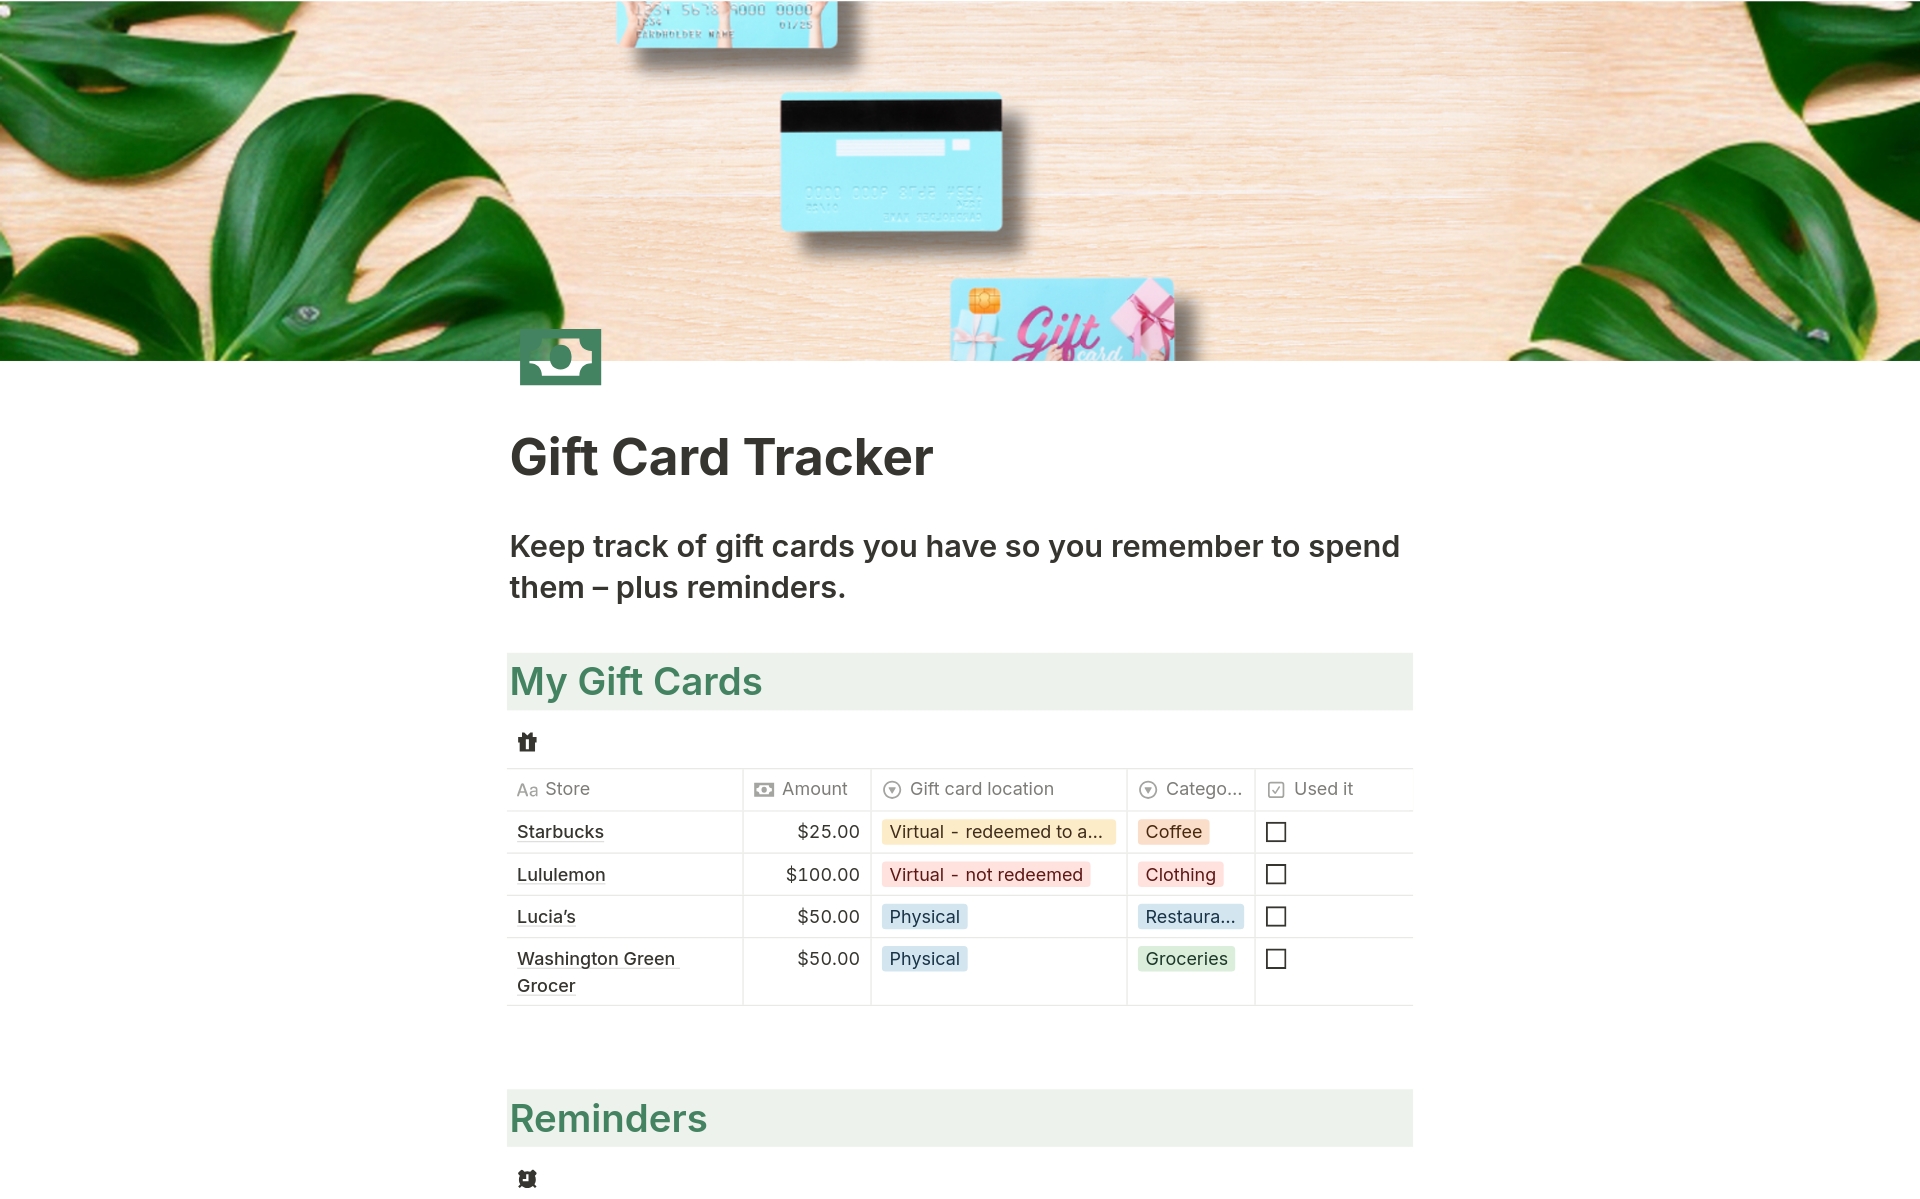 Keep track of gift cards you have so you remember to spend them.